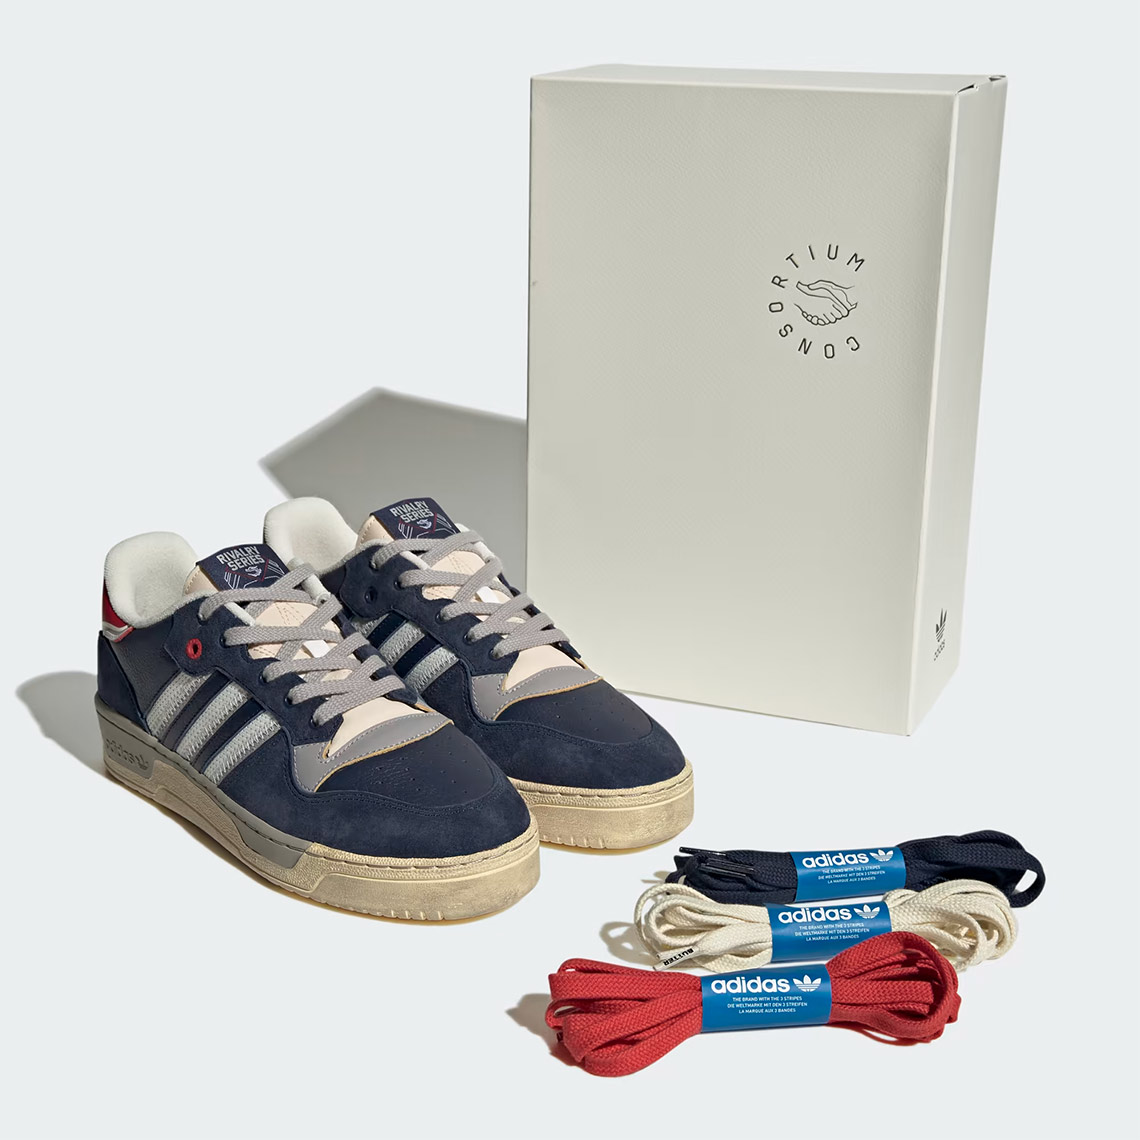 Extra Butter Adidas Consortium Rivalry Rangers Id2870 3